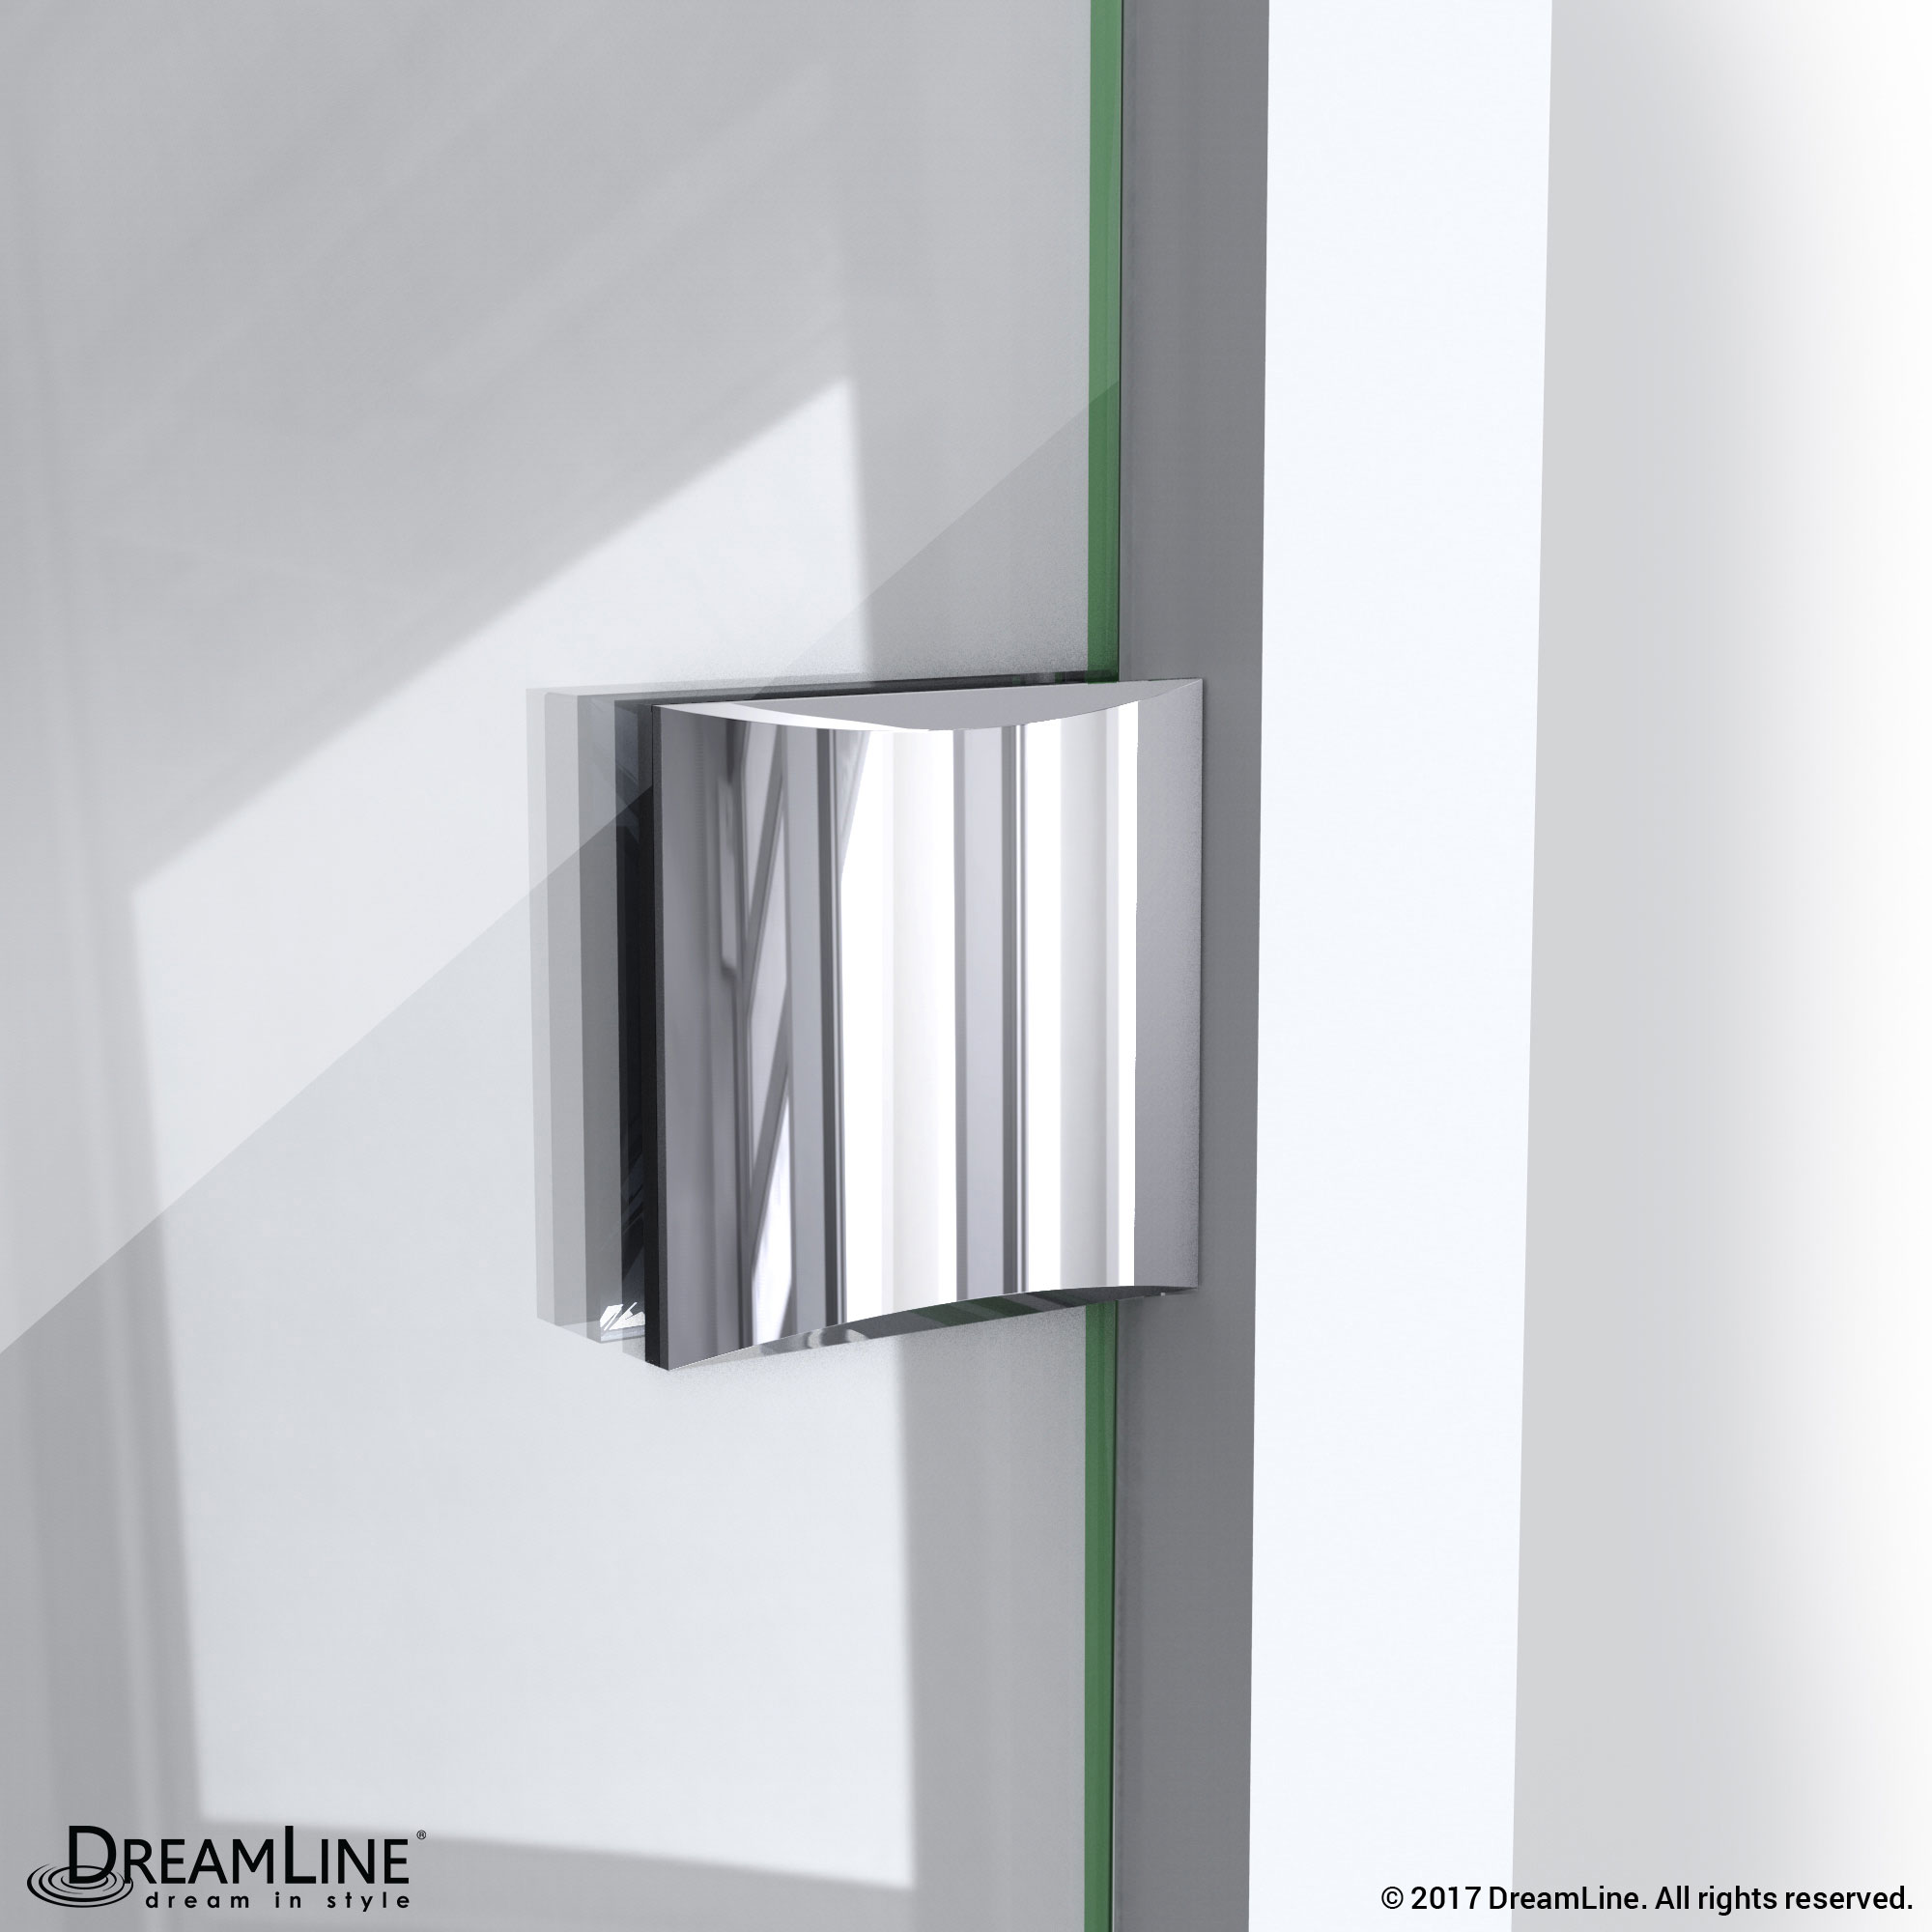 DreamLine Prism Lux 36 5/16 in. D x 36 5/16 in. W x 72 in. H Fully Frameless Hinged Shower Enclosure in Satin Black